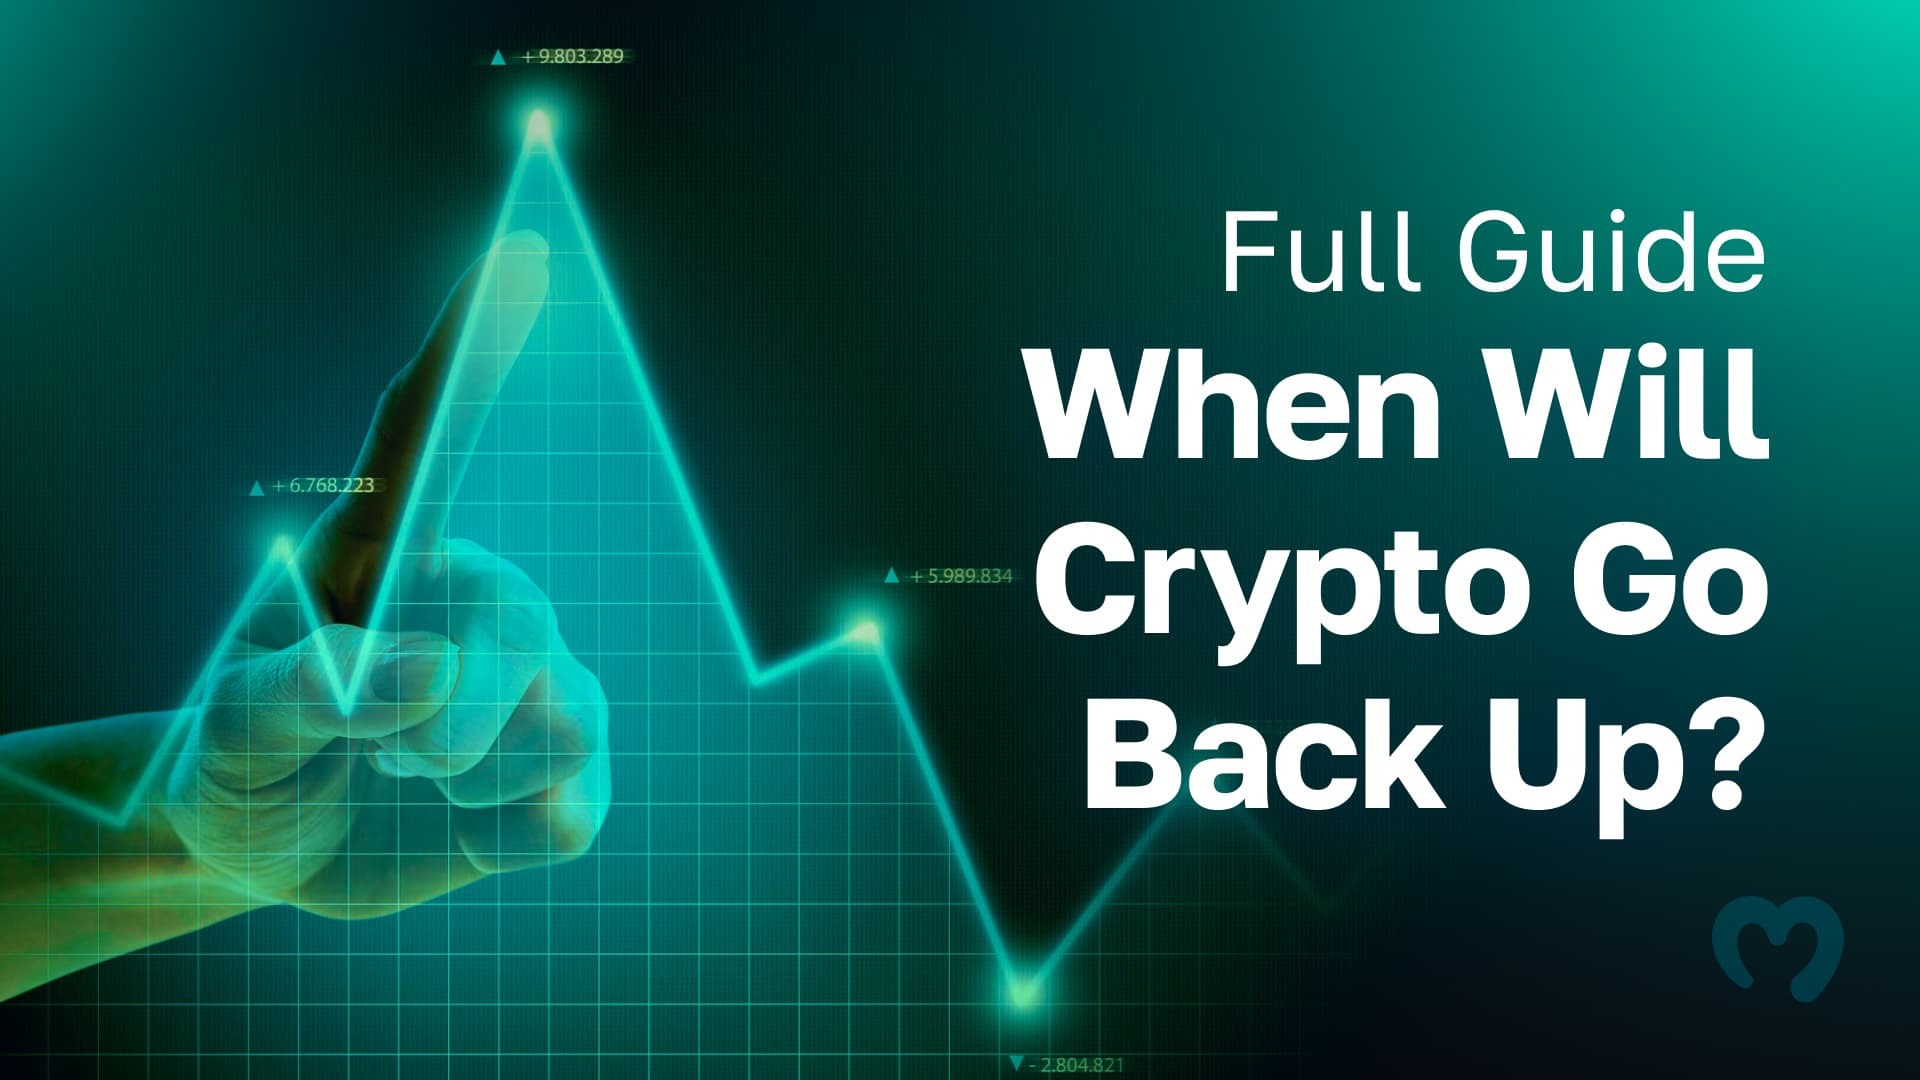 Full Guide When Will Crypto Go Back Up?